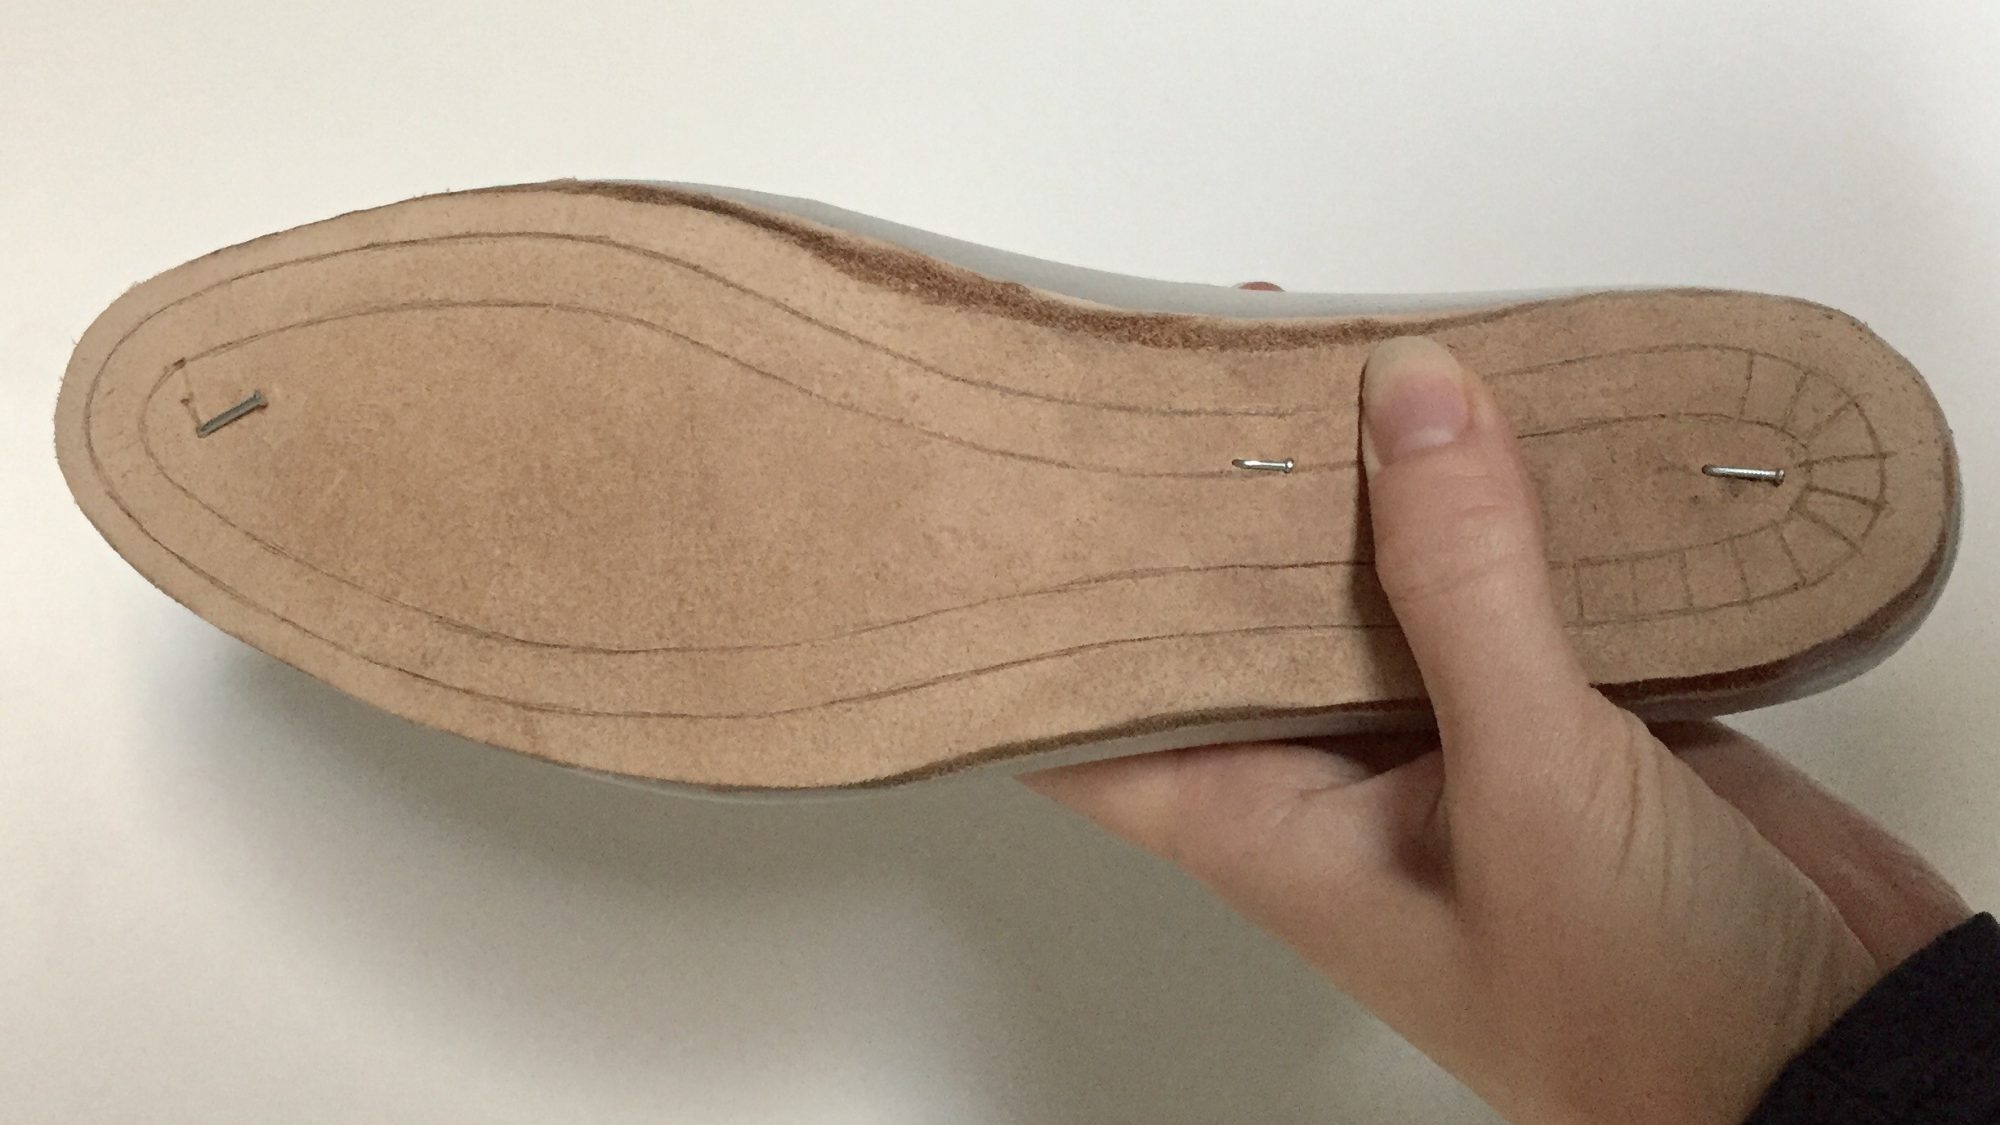 Lace Boots - Preparing insole